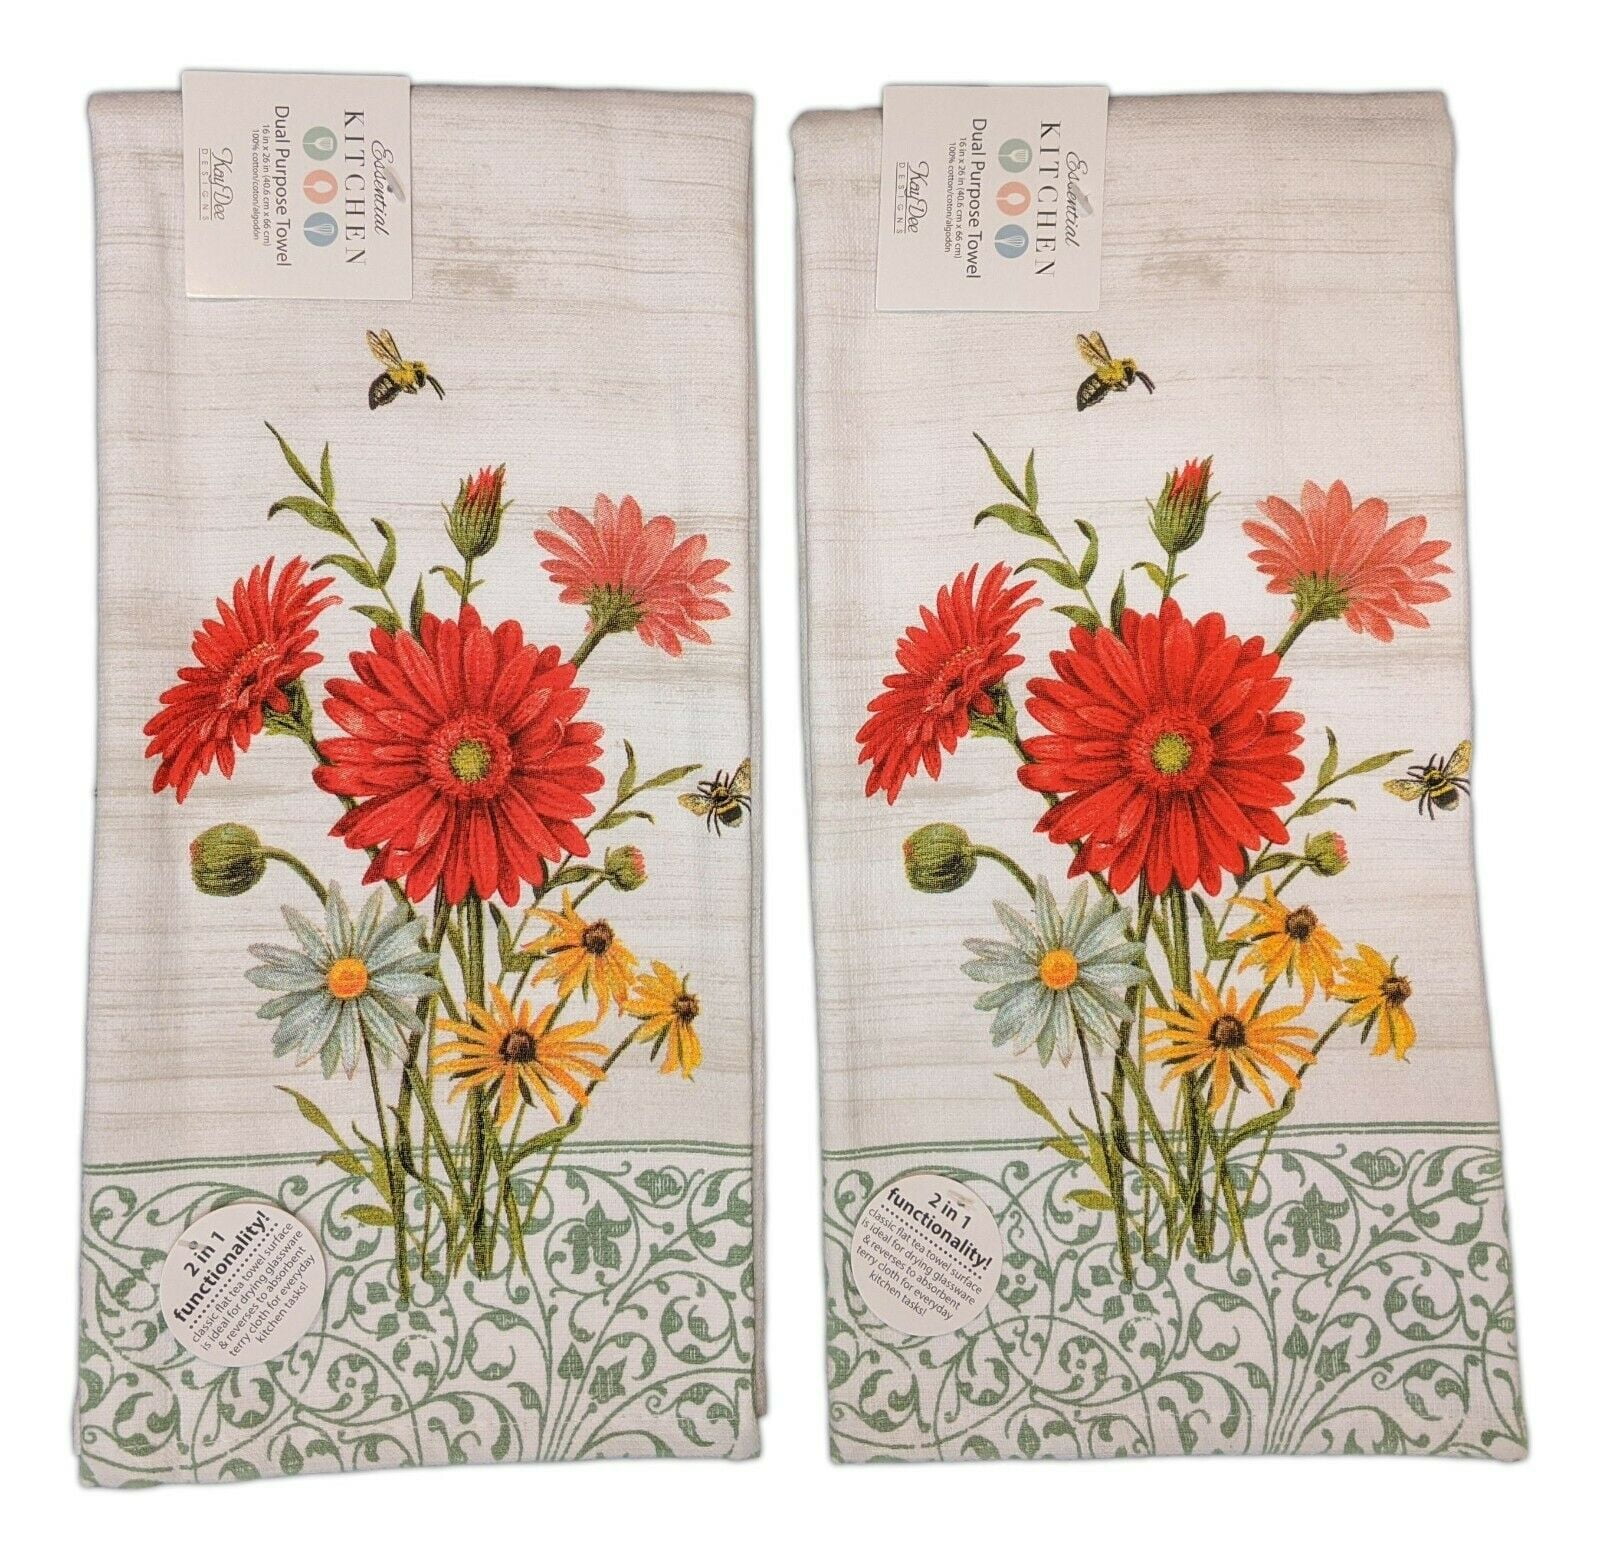 QODUNG Farmhouse Yellow Daisy Flowers and Honey Bee Soft Kitchen Towels  Dishcloths 16x24 Inch Set of 2,Summer Spring Gifts Drying Cloth Hand Towels